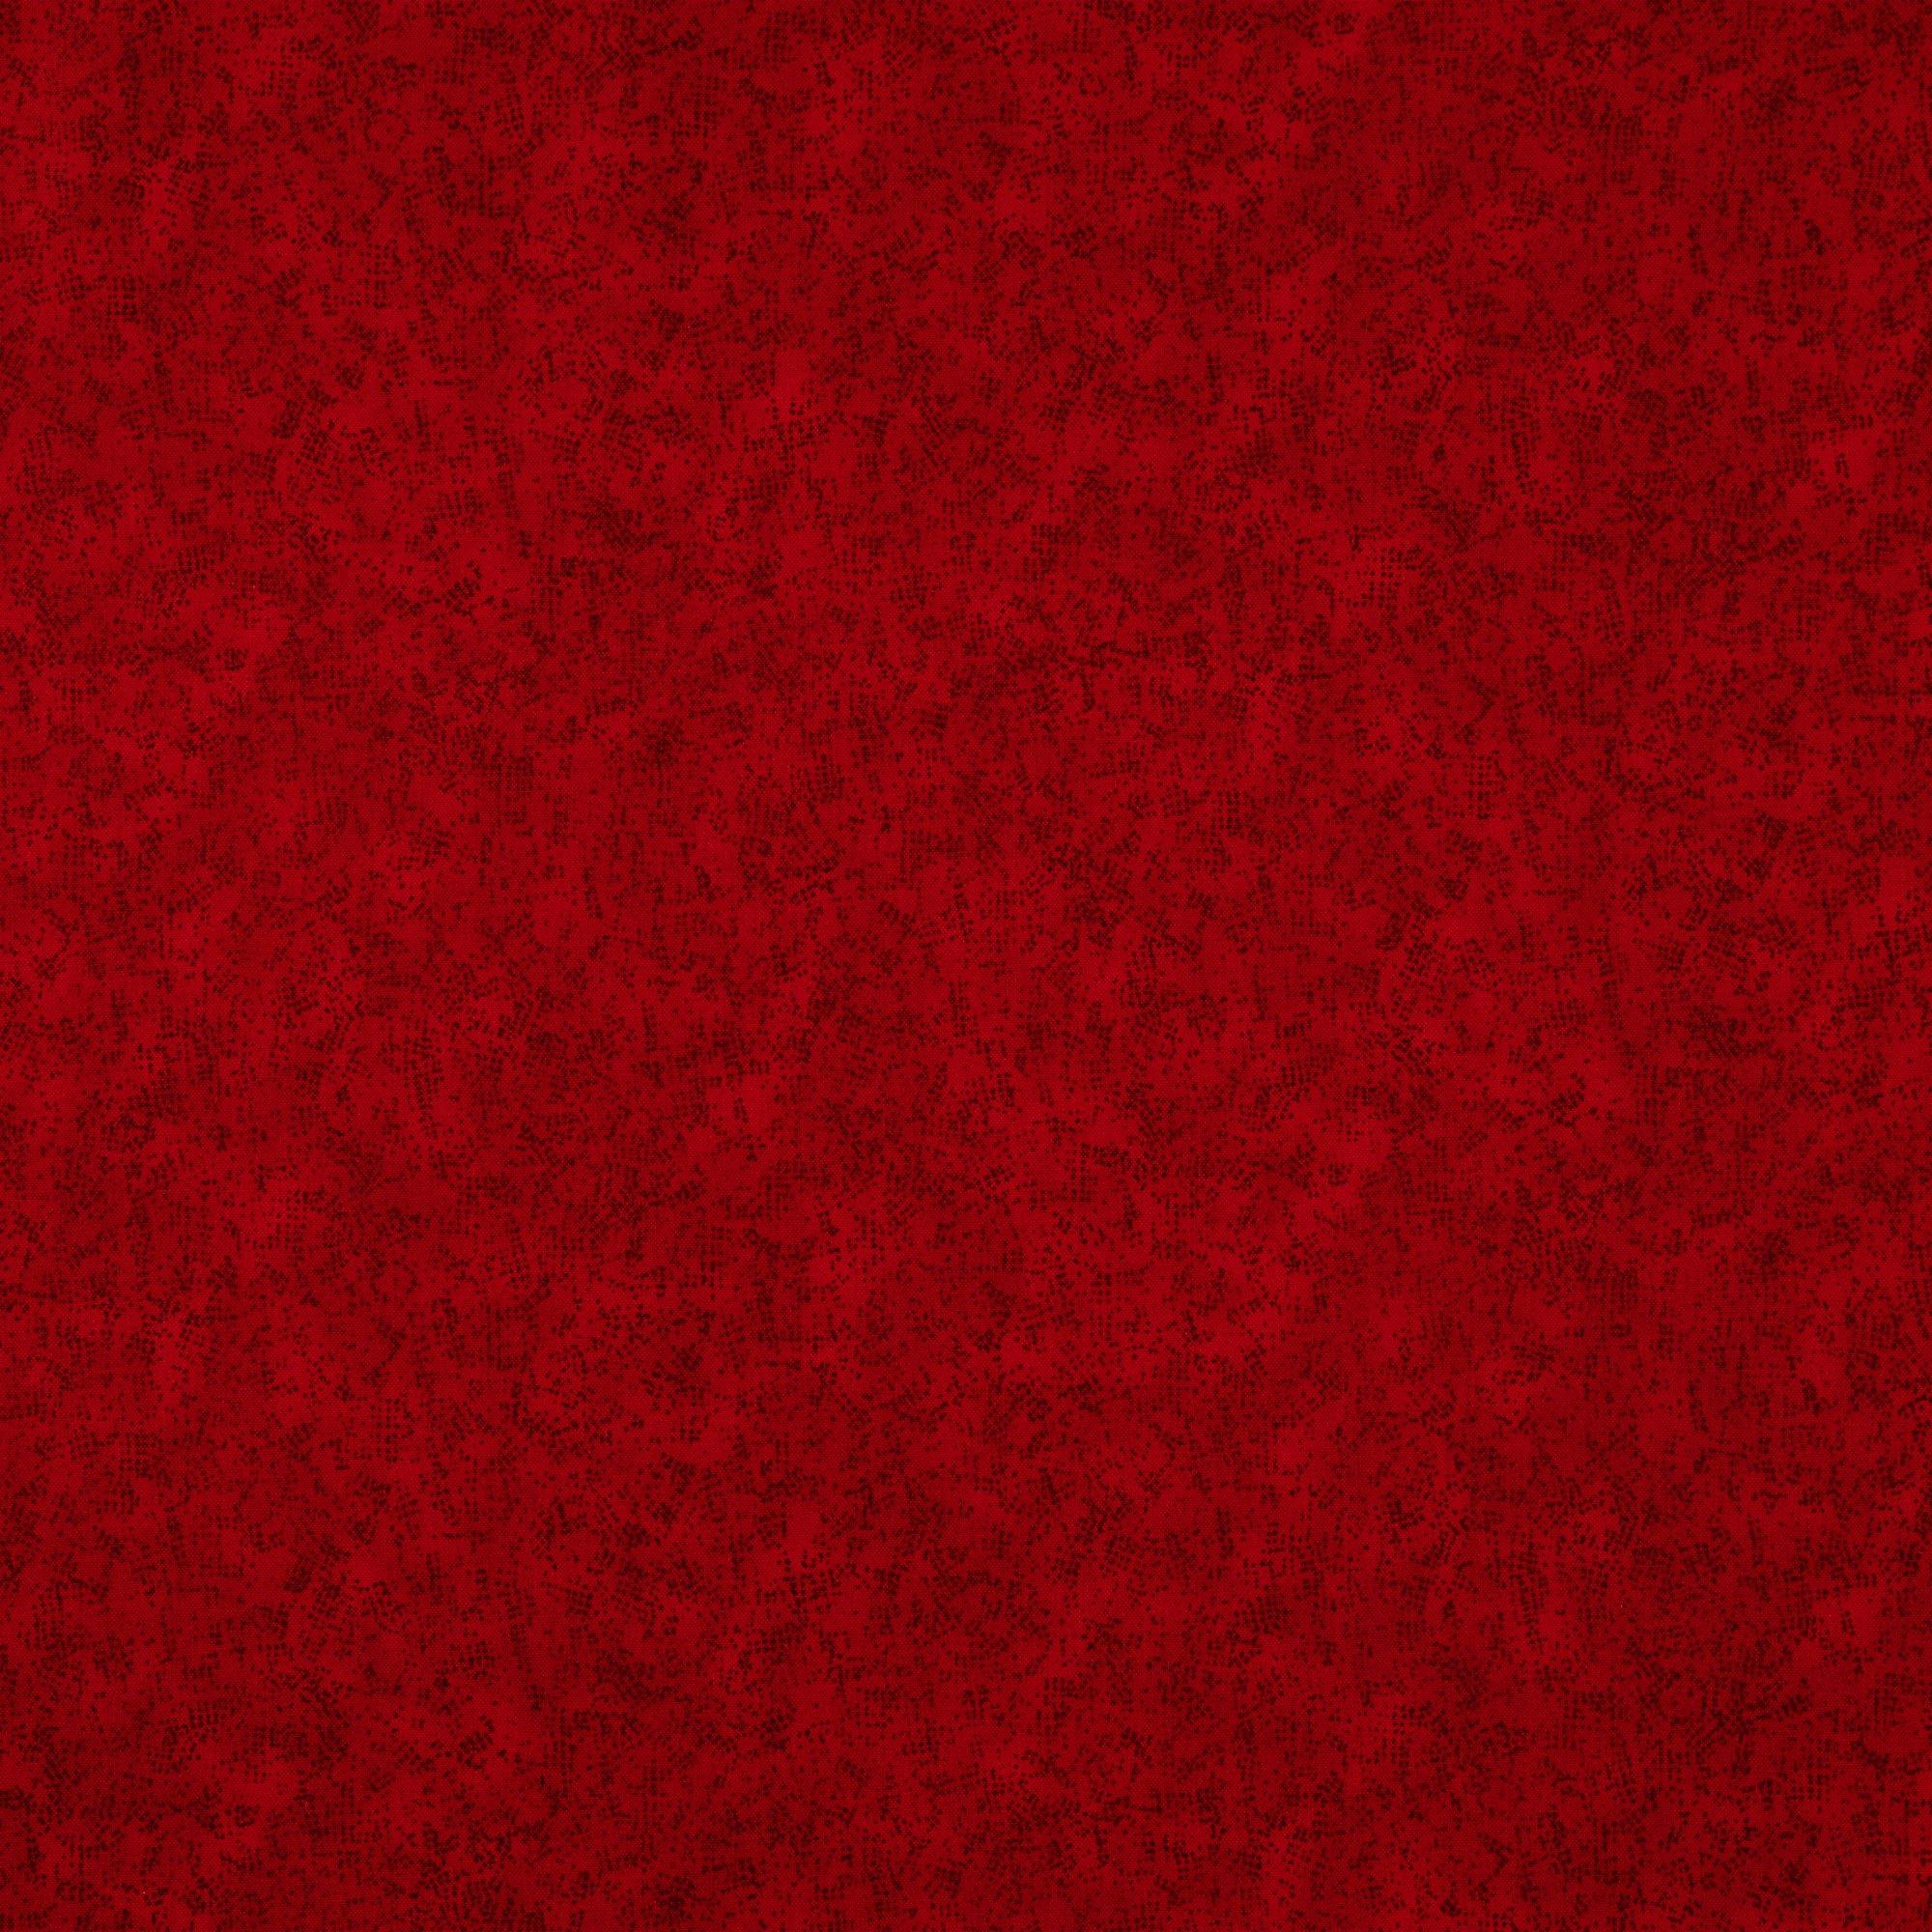 Red Freckles Cotton Calico Fabric, Hobby Lobby